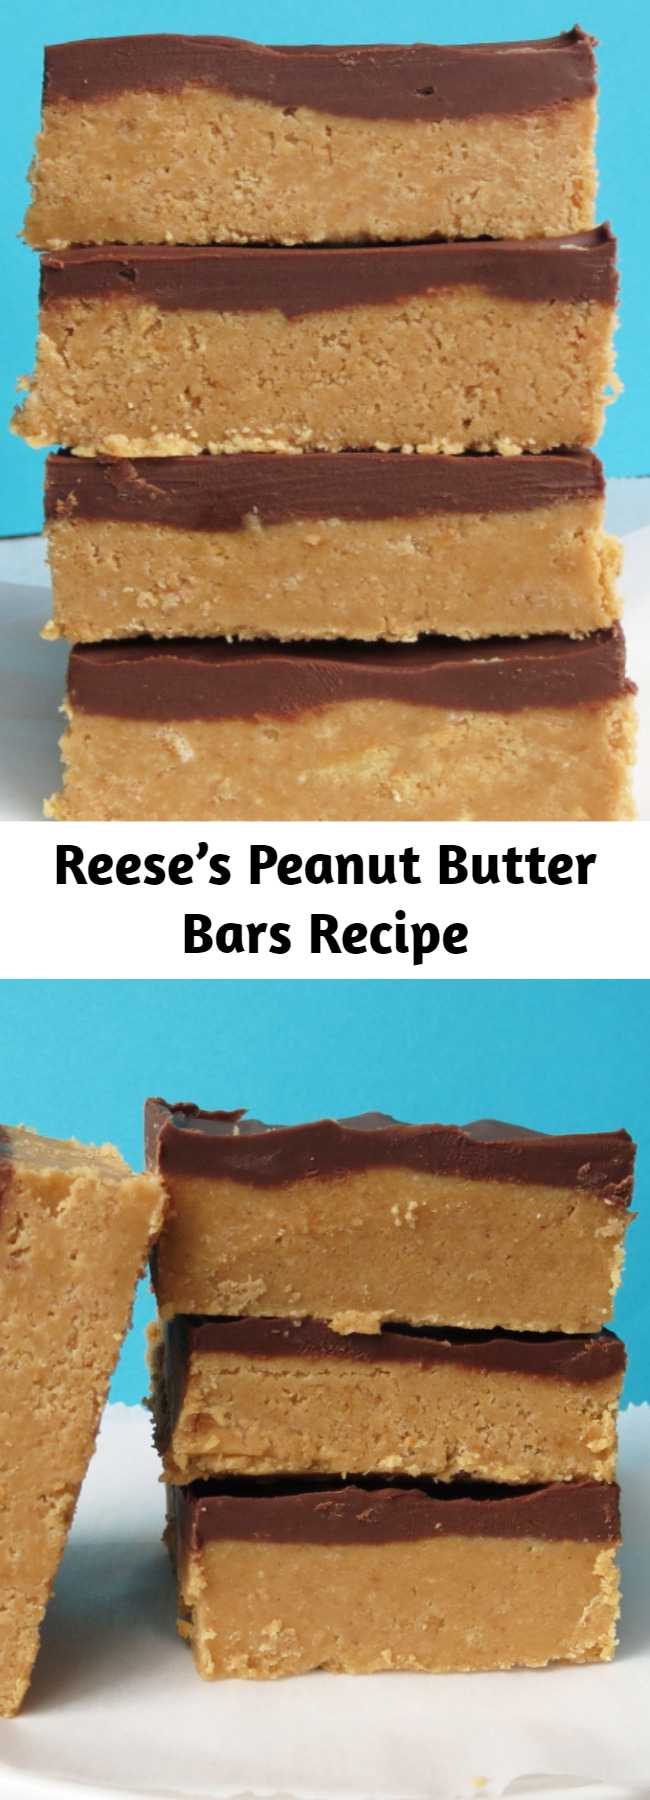 Reese’s Peanut Butter Bars Recipe - They taste EXACTLY like a Reese’s, but something about them being homemade just makes them better. No bake, no mess, no fuss.  I had these cooling in the fridge less than 10 minutes after I started making them. I only dirtied one bowl.